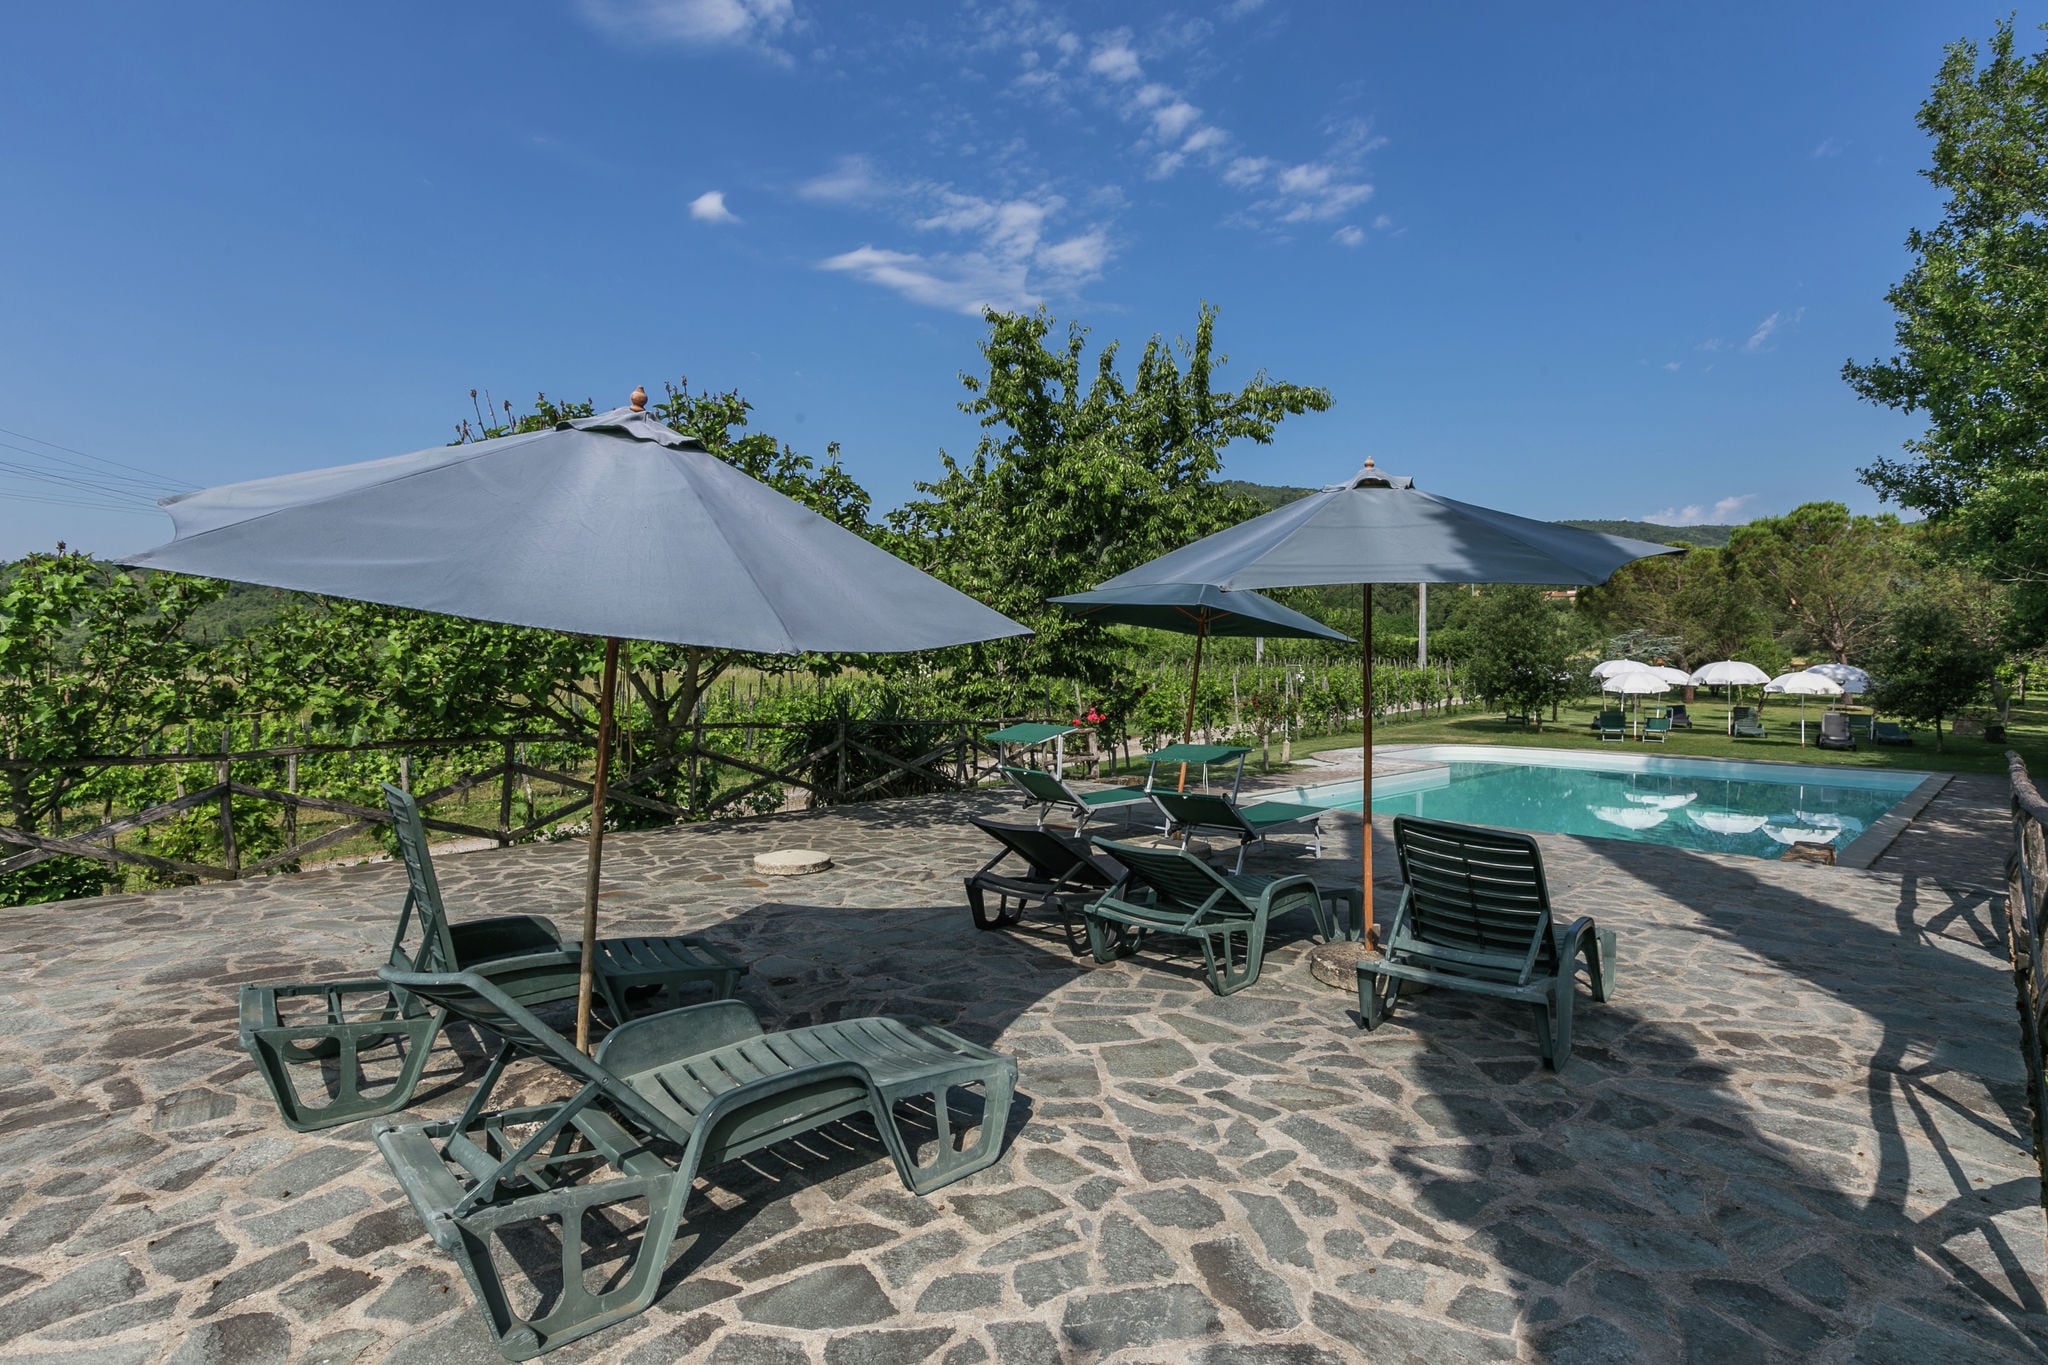 Authentic farm holiday with swimming pool, pizza oven, spacious garden and private terrace